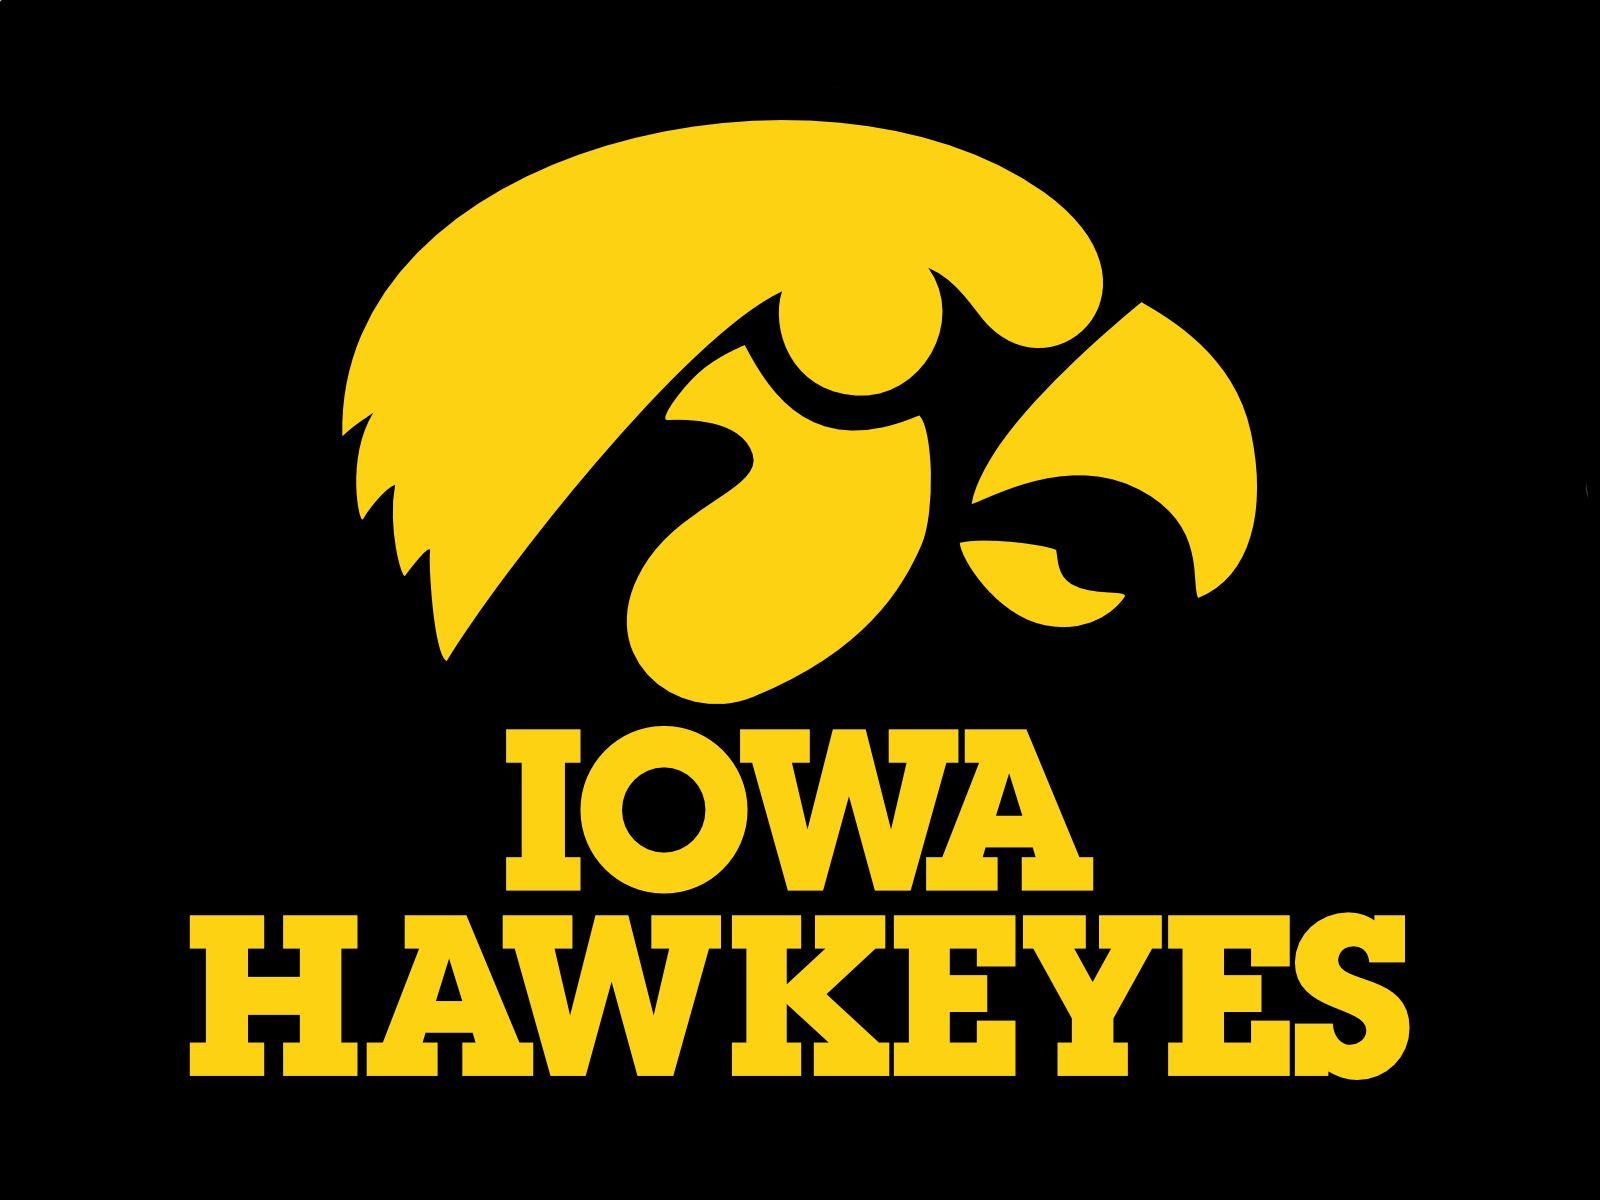 Hawkeye Logo - Iowa Hawkeyes Logo, Iowa Hawkeyes Symbol, Meaning, History and Evolution